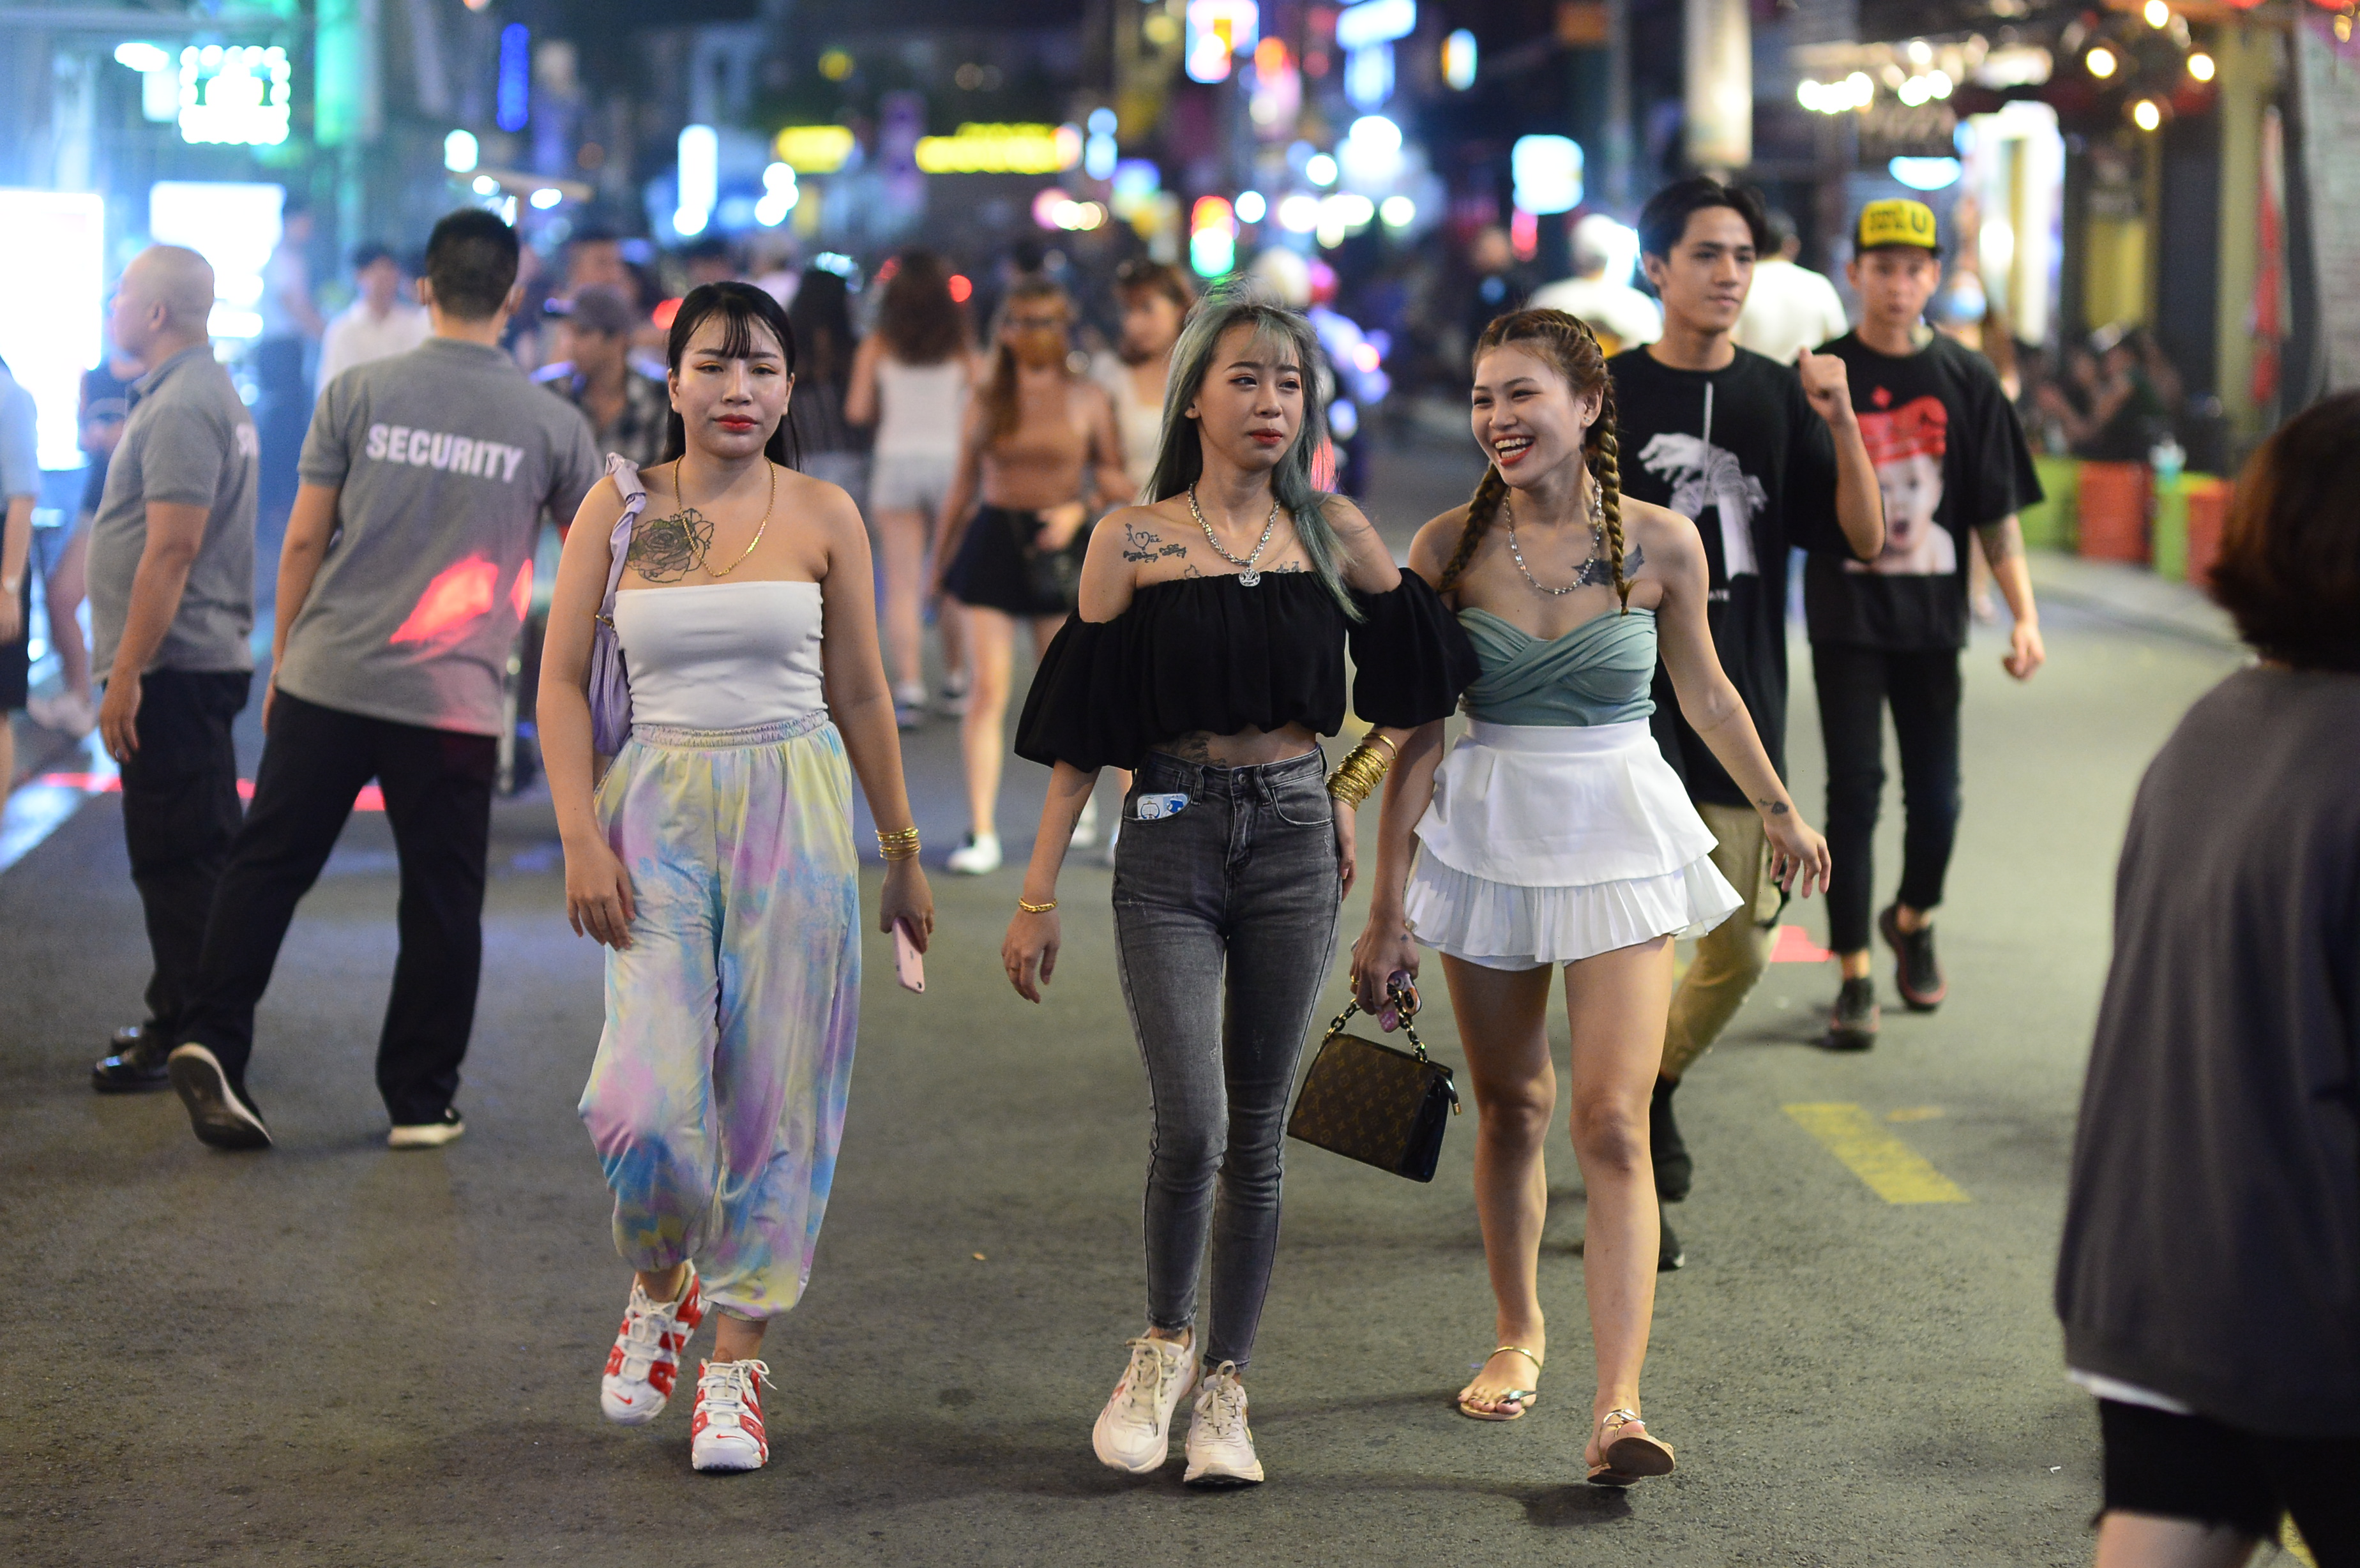 Visitors walk on Bui Vien Street in Ho Chi Minh City’s District 1 at around 9pm on September 8, 2020. Photo: Quang Dinh / Tuoi Tre